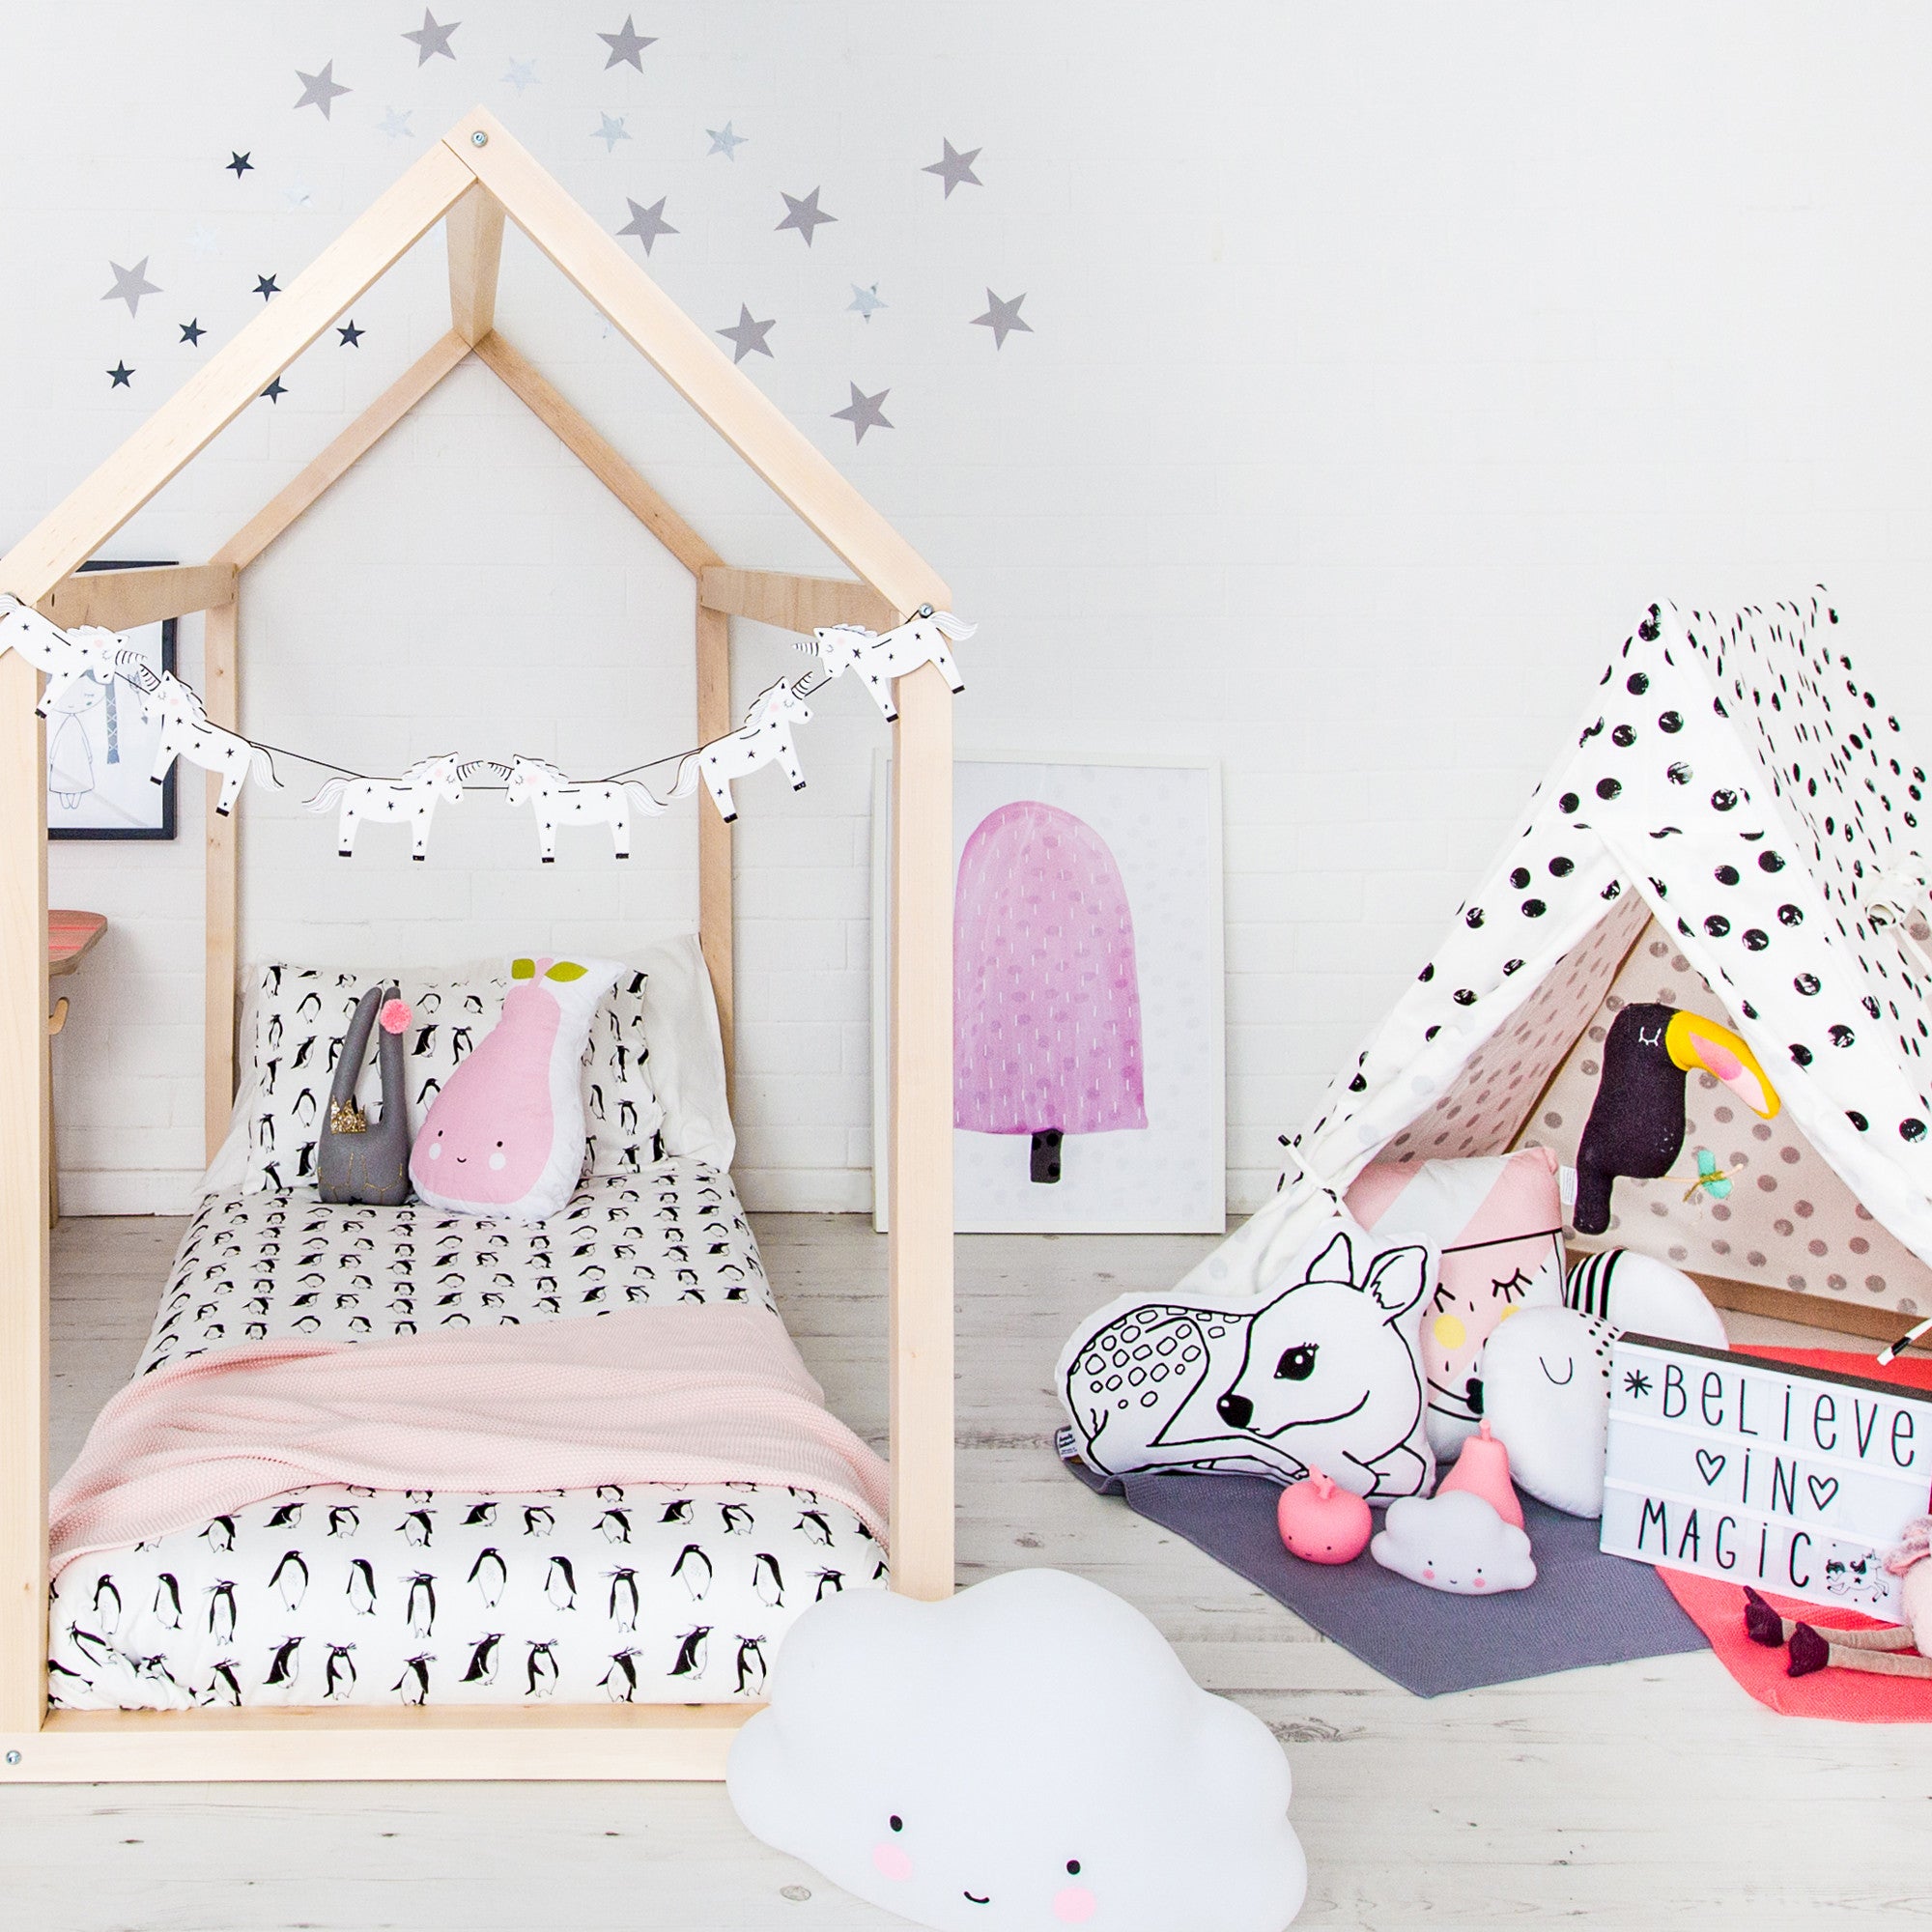 Stardust and Unicorns Children's Bedroom, styled by Bobby Rabbit.